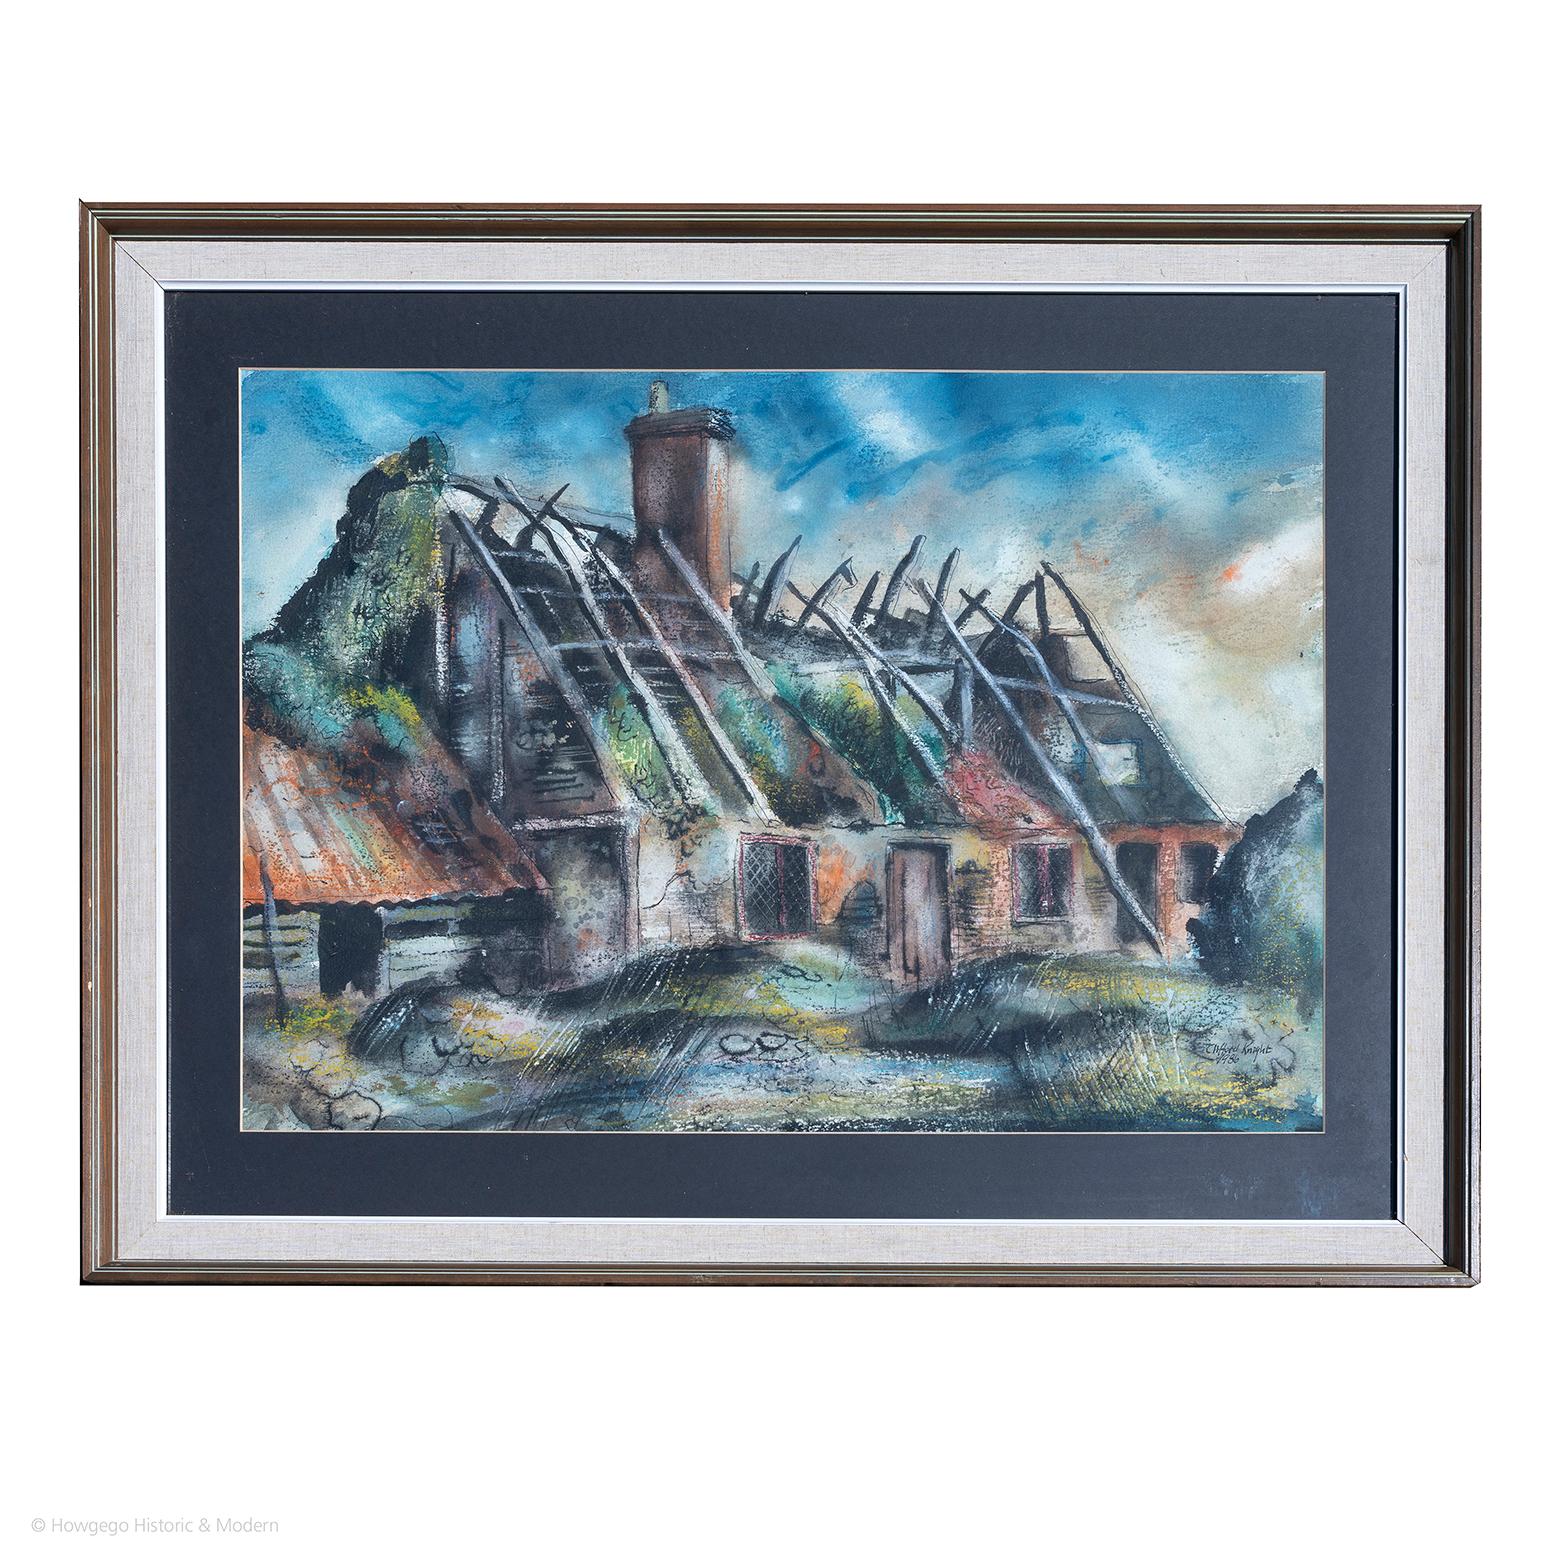 Harry Newman's Derelict cottages, Stagsden 1986
Watercolour, ink, crayon, gouache
Signed lower right : Clifford Knight 1986
label verso : Ghosts & Silent Witness Exhibition, Northampton, no 20

In the original gilded frame length 92.5cm., 36